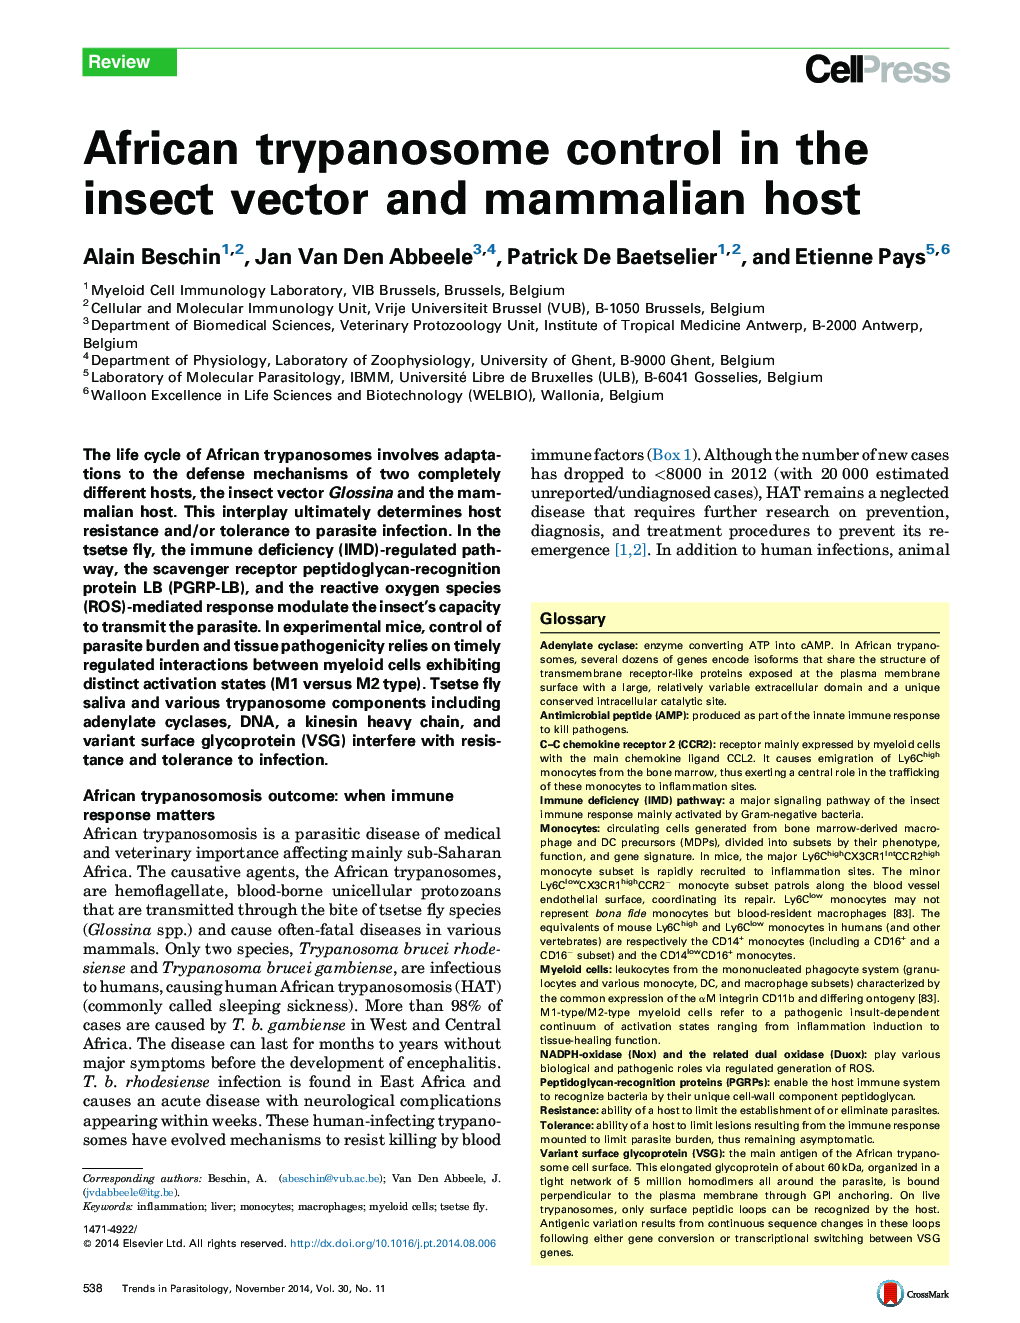 African trypanosome control in the insect vector and mammalian host